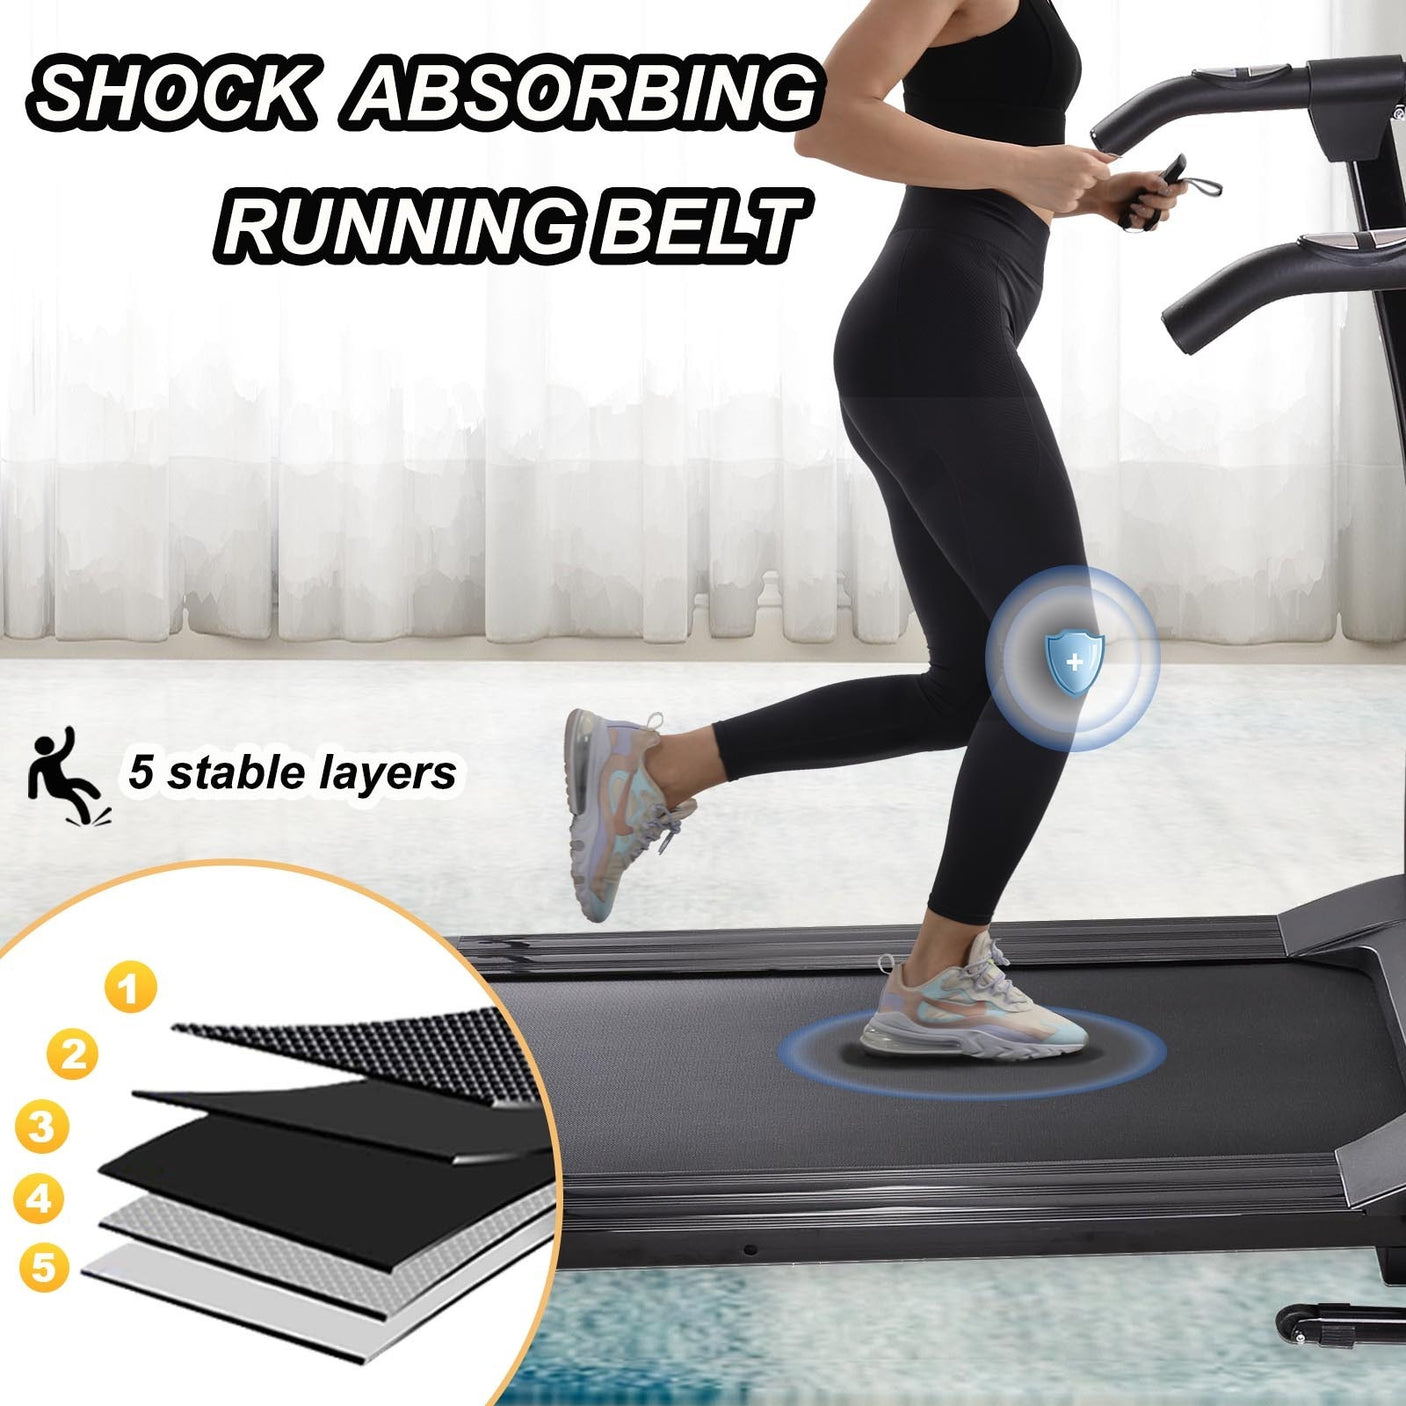 Folding Treadmills for Home, Foldable Electric Treadmill with LCD display, Lightweight Compact Treadmill Fitness Running Walking Jogging Exercise for Home Office Apartment Saver Space